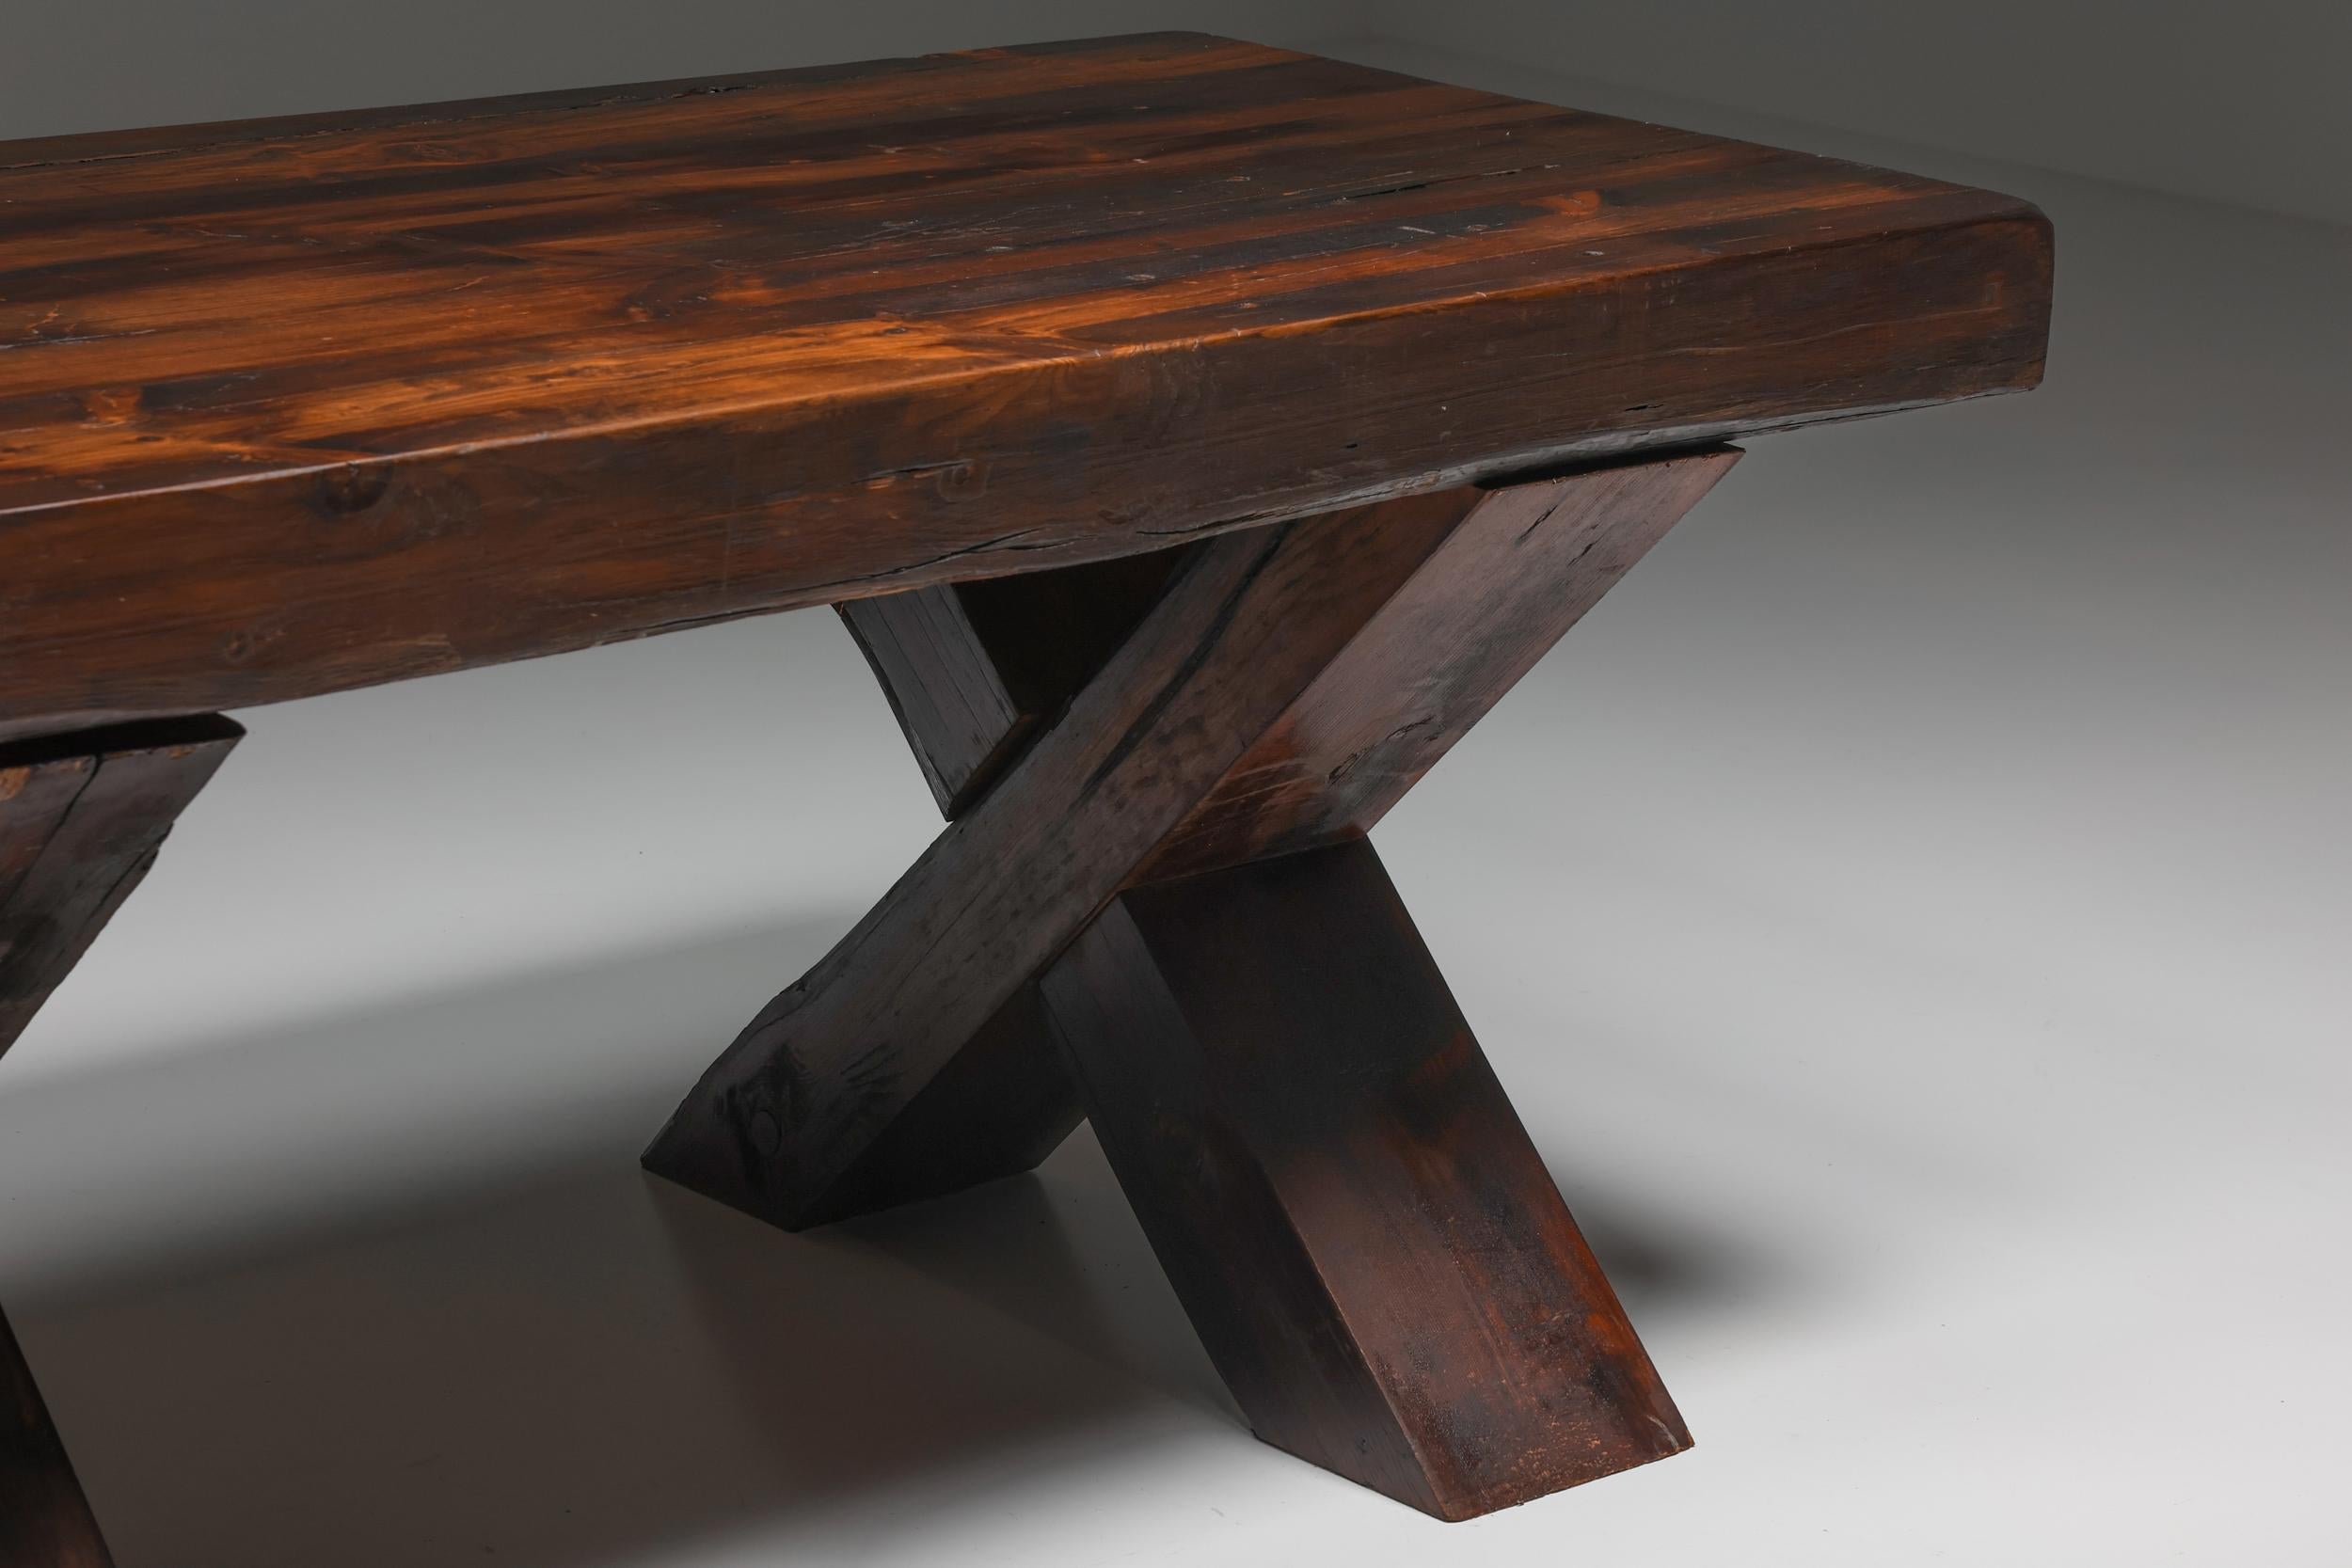 Rustic Brutalist Dark Wooden Dining Table with X-Legs, Italy, 1940's For Sale 5